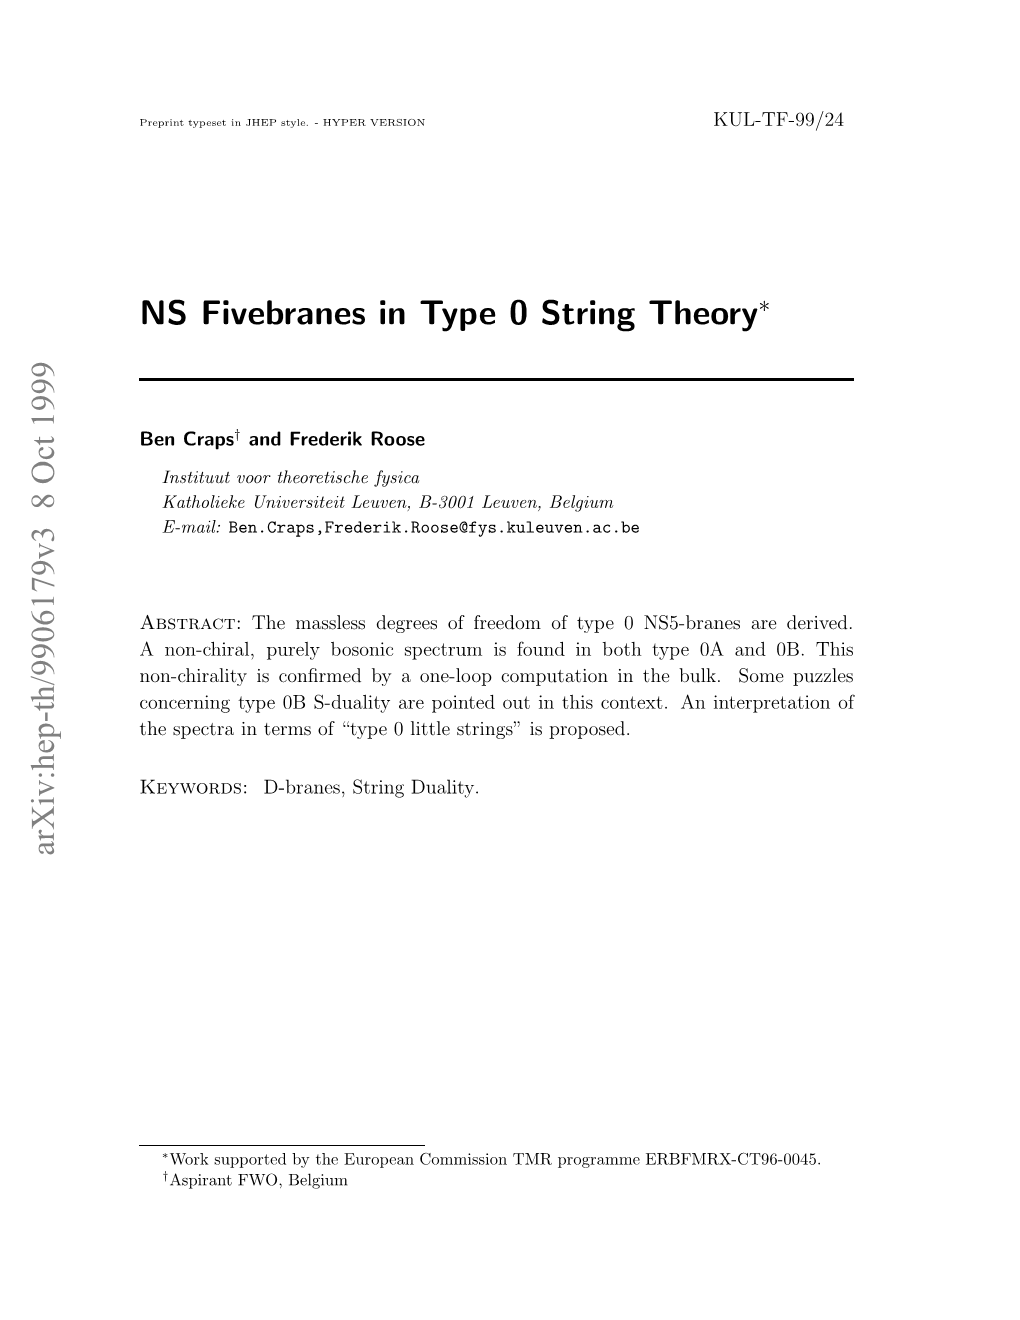 NS Fivebranes in Type 0 String Theory